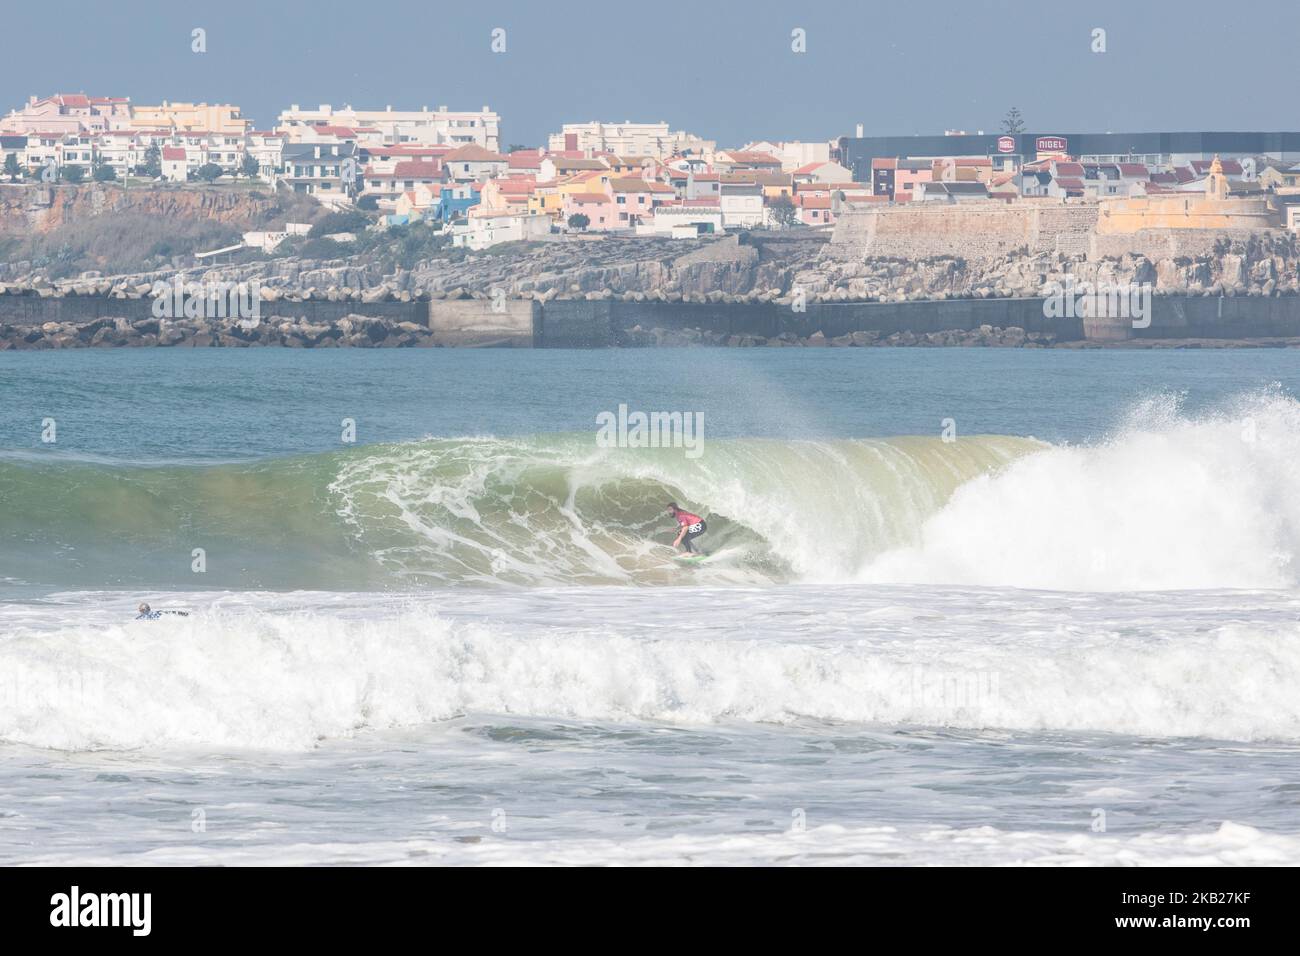 The Australian surfer Wade Carmichael on the wave. With the participation of the best surfers in the world, the Meo Rip Curl Pro Portugal, an integral part of the WSL World Surf League Tour, is held in Peniche, Portugal on October 16, 2018 on the beach of Supertubos, which at this time of year offers the best conditions for surfing competitions. (Photo by Henrique Casinhas/NurPhoto) Stock Photo